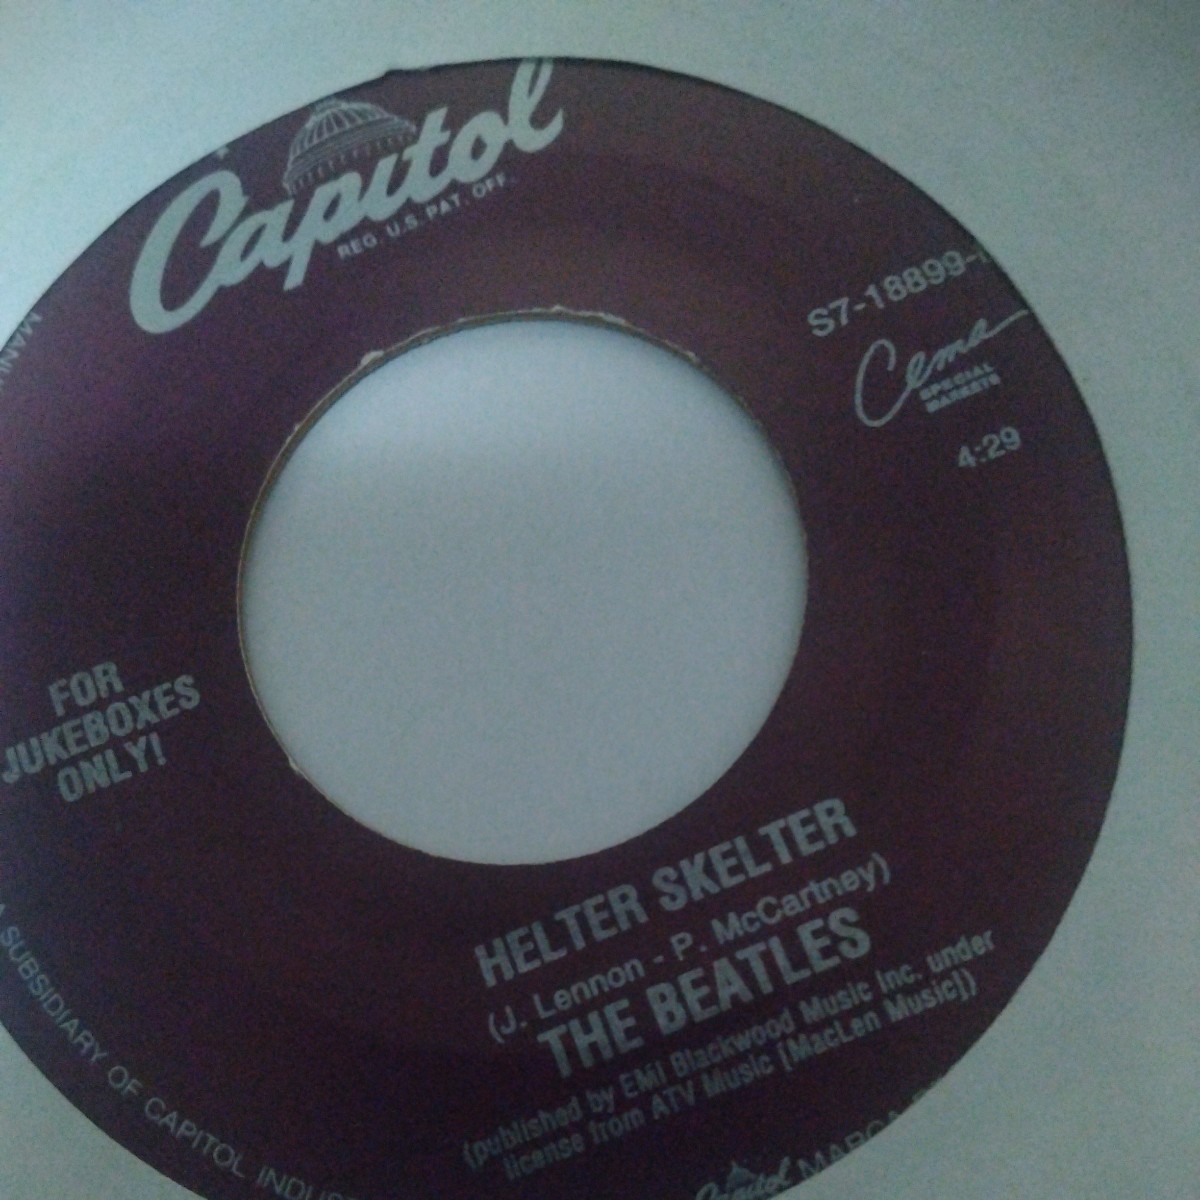 7"SINGLE Orange Vinyl THE BEATLES/GOT TO GET YOU INYO MY LIFE cw HELTER SKELTER USA CAPITOL Cema Special Markets S7-18899_画像7